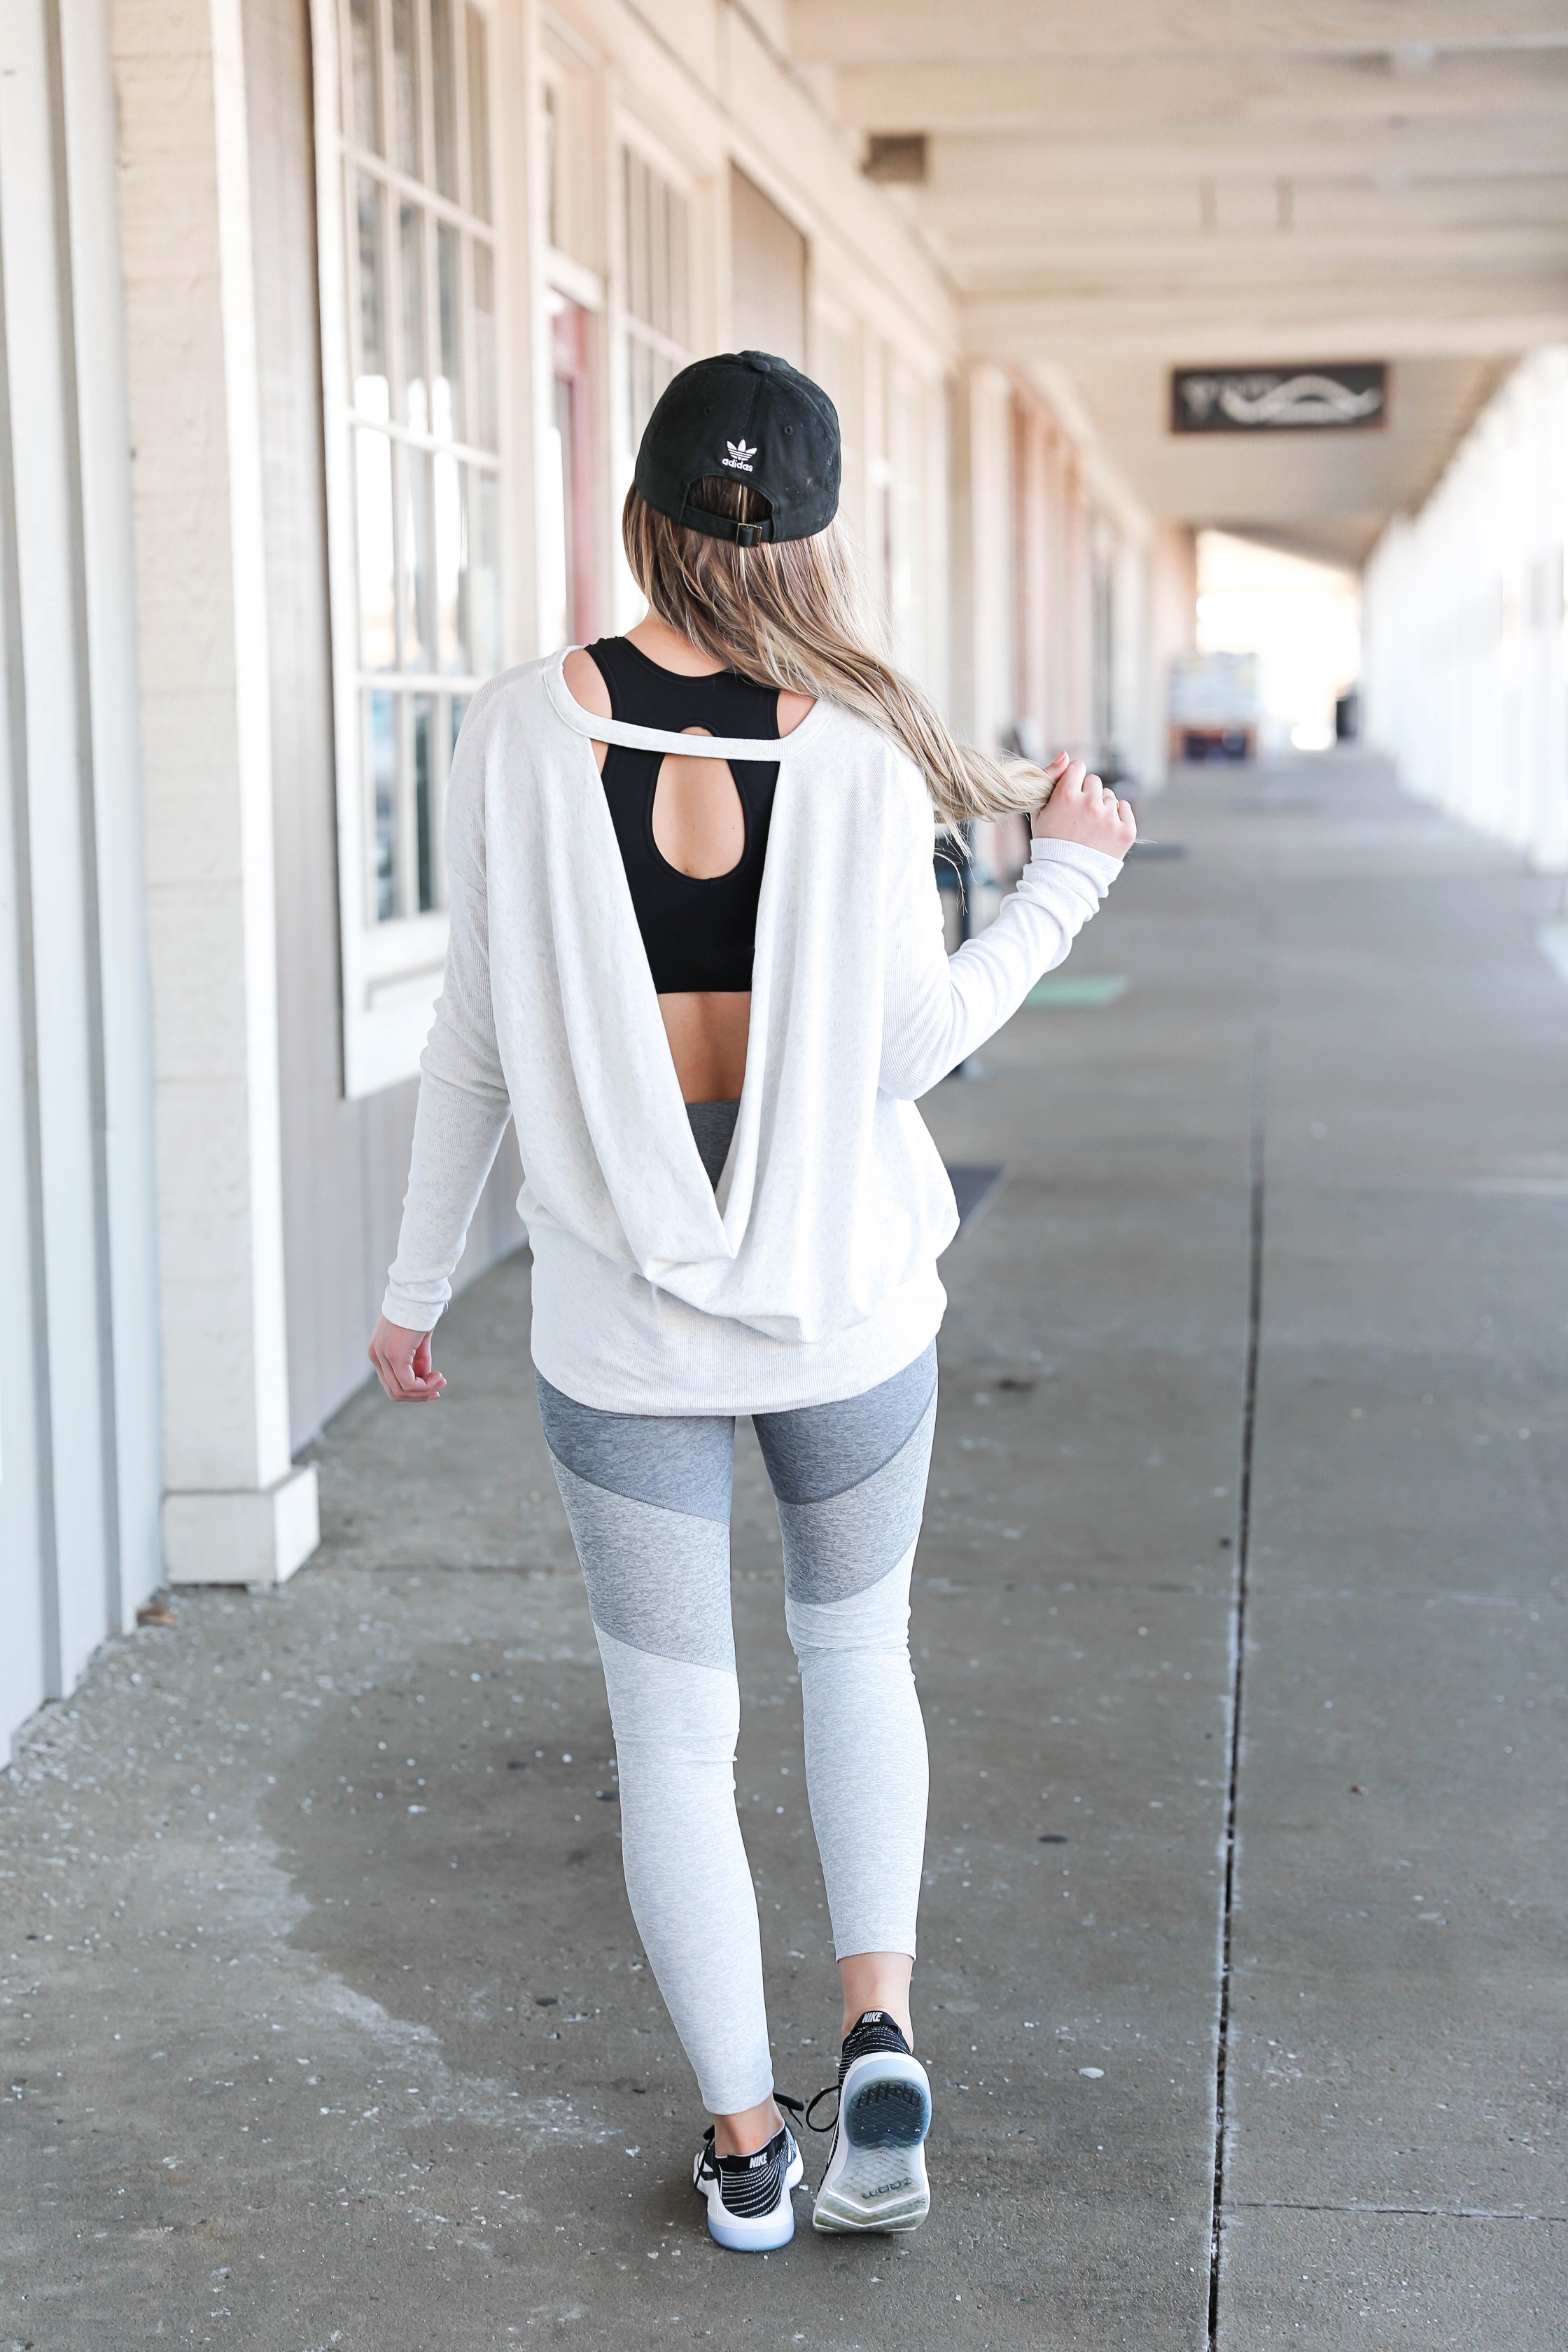 Activewear Outfit Ideas to Hit Those New Year Goals